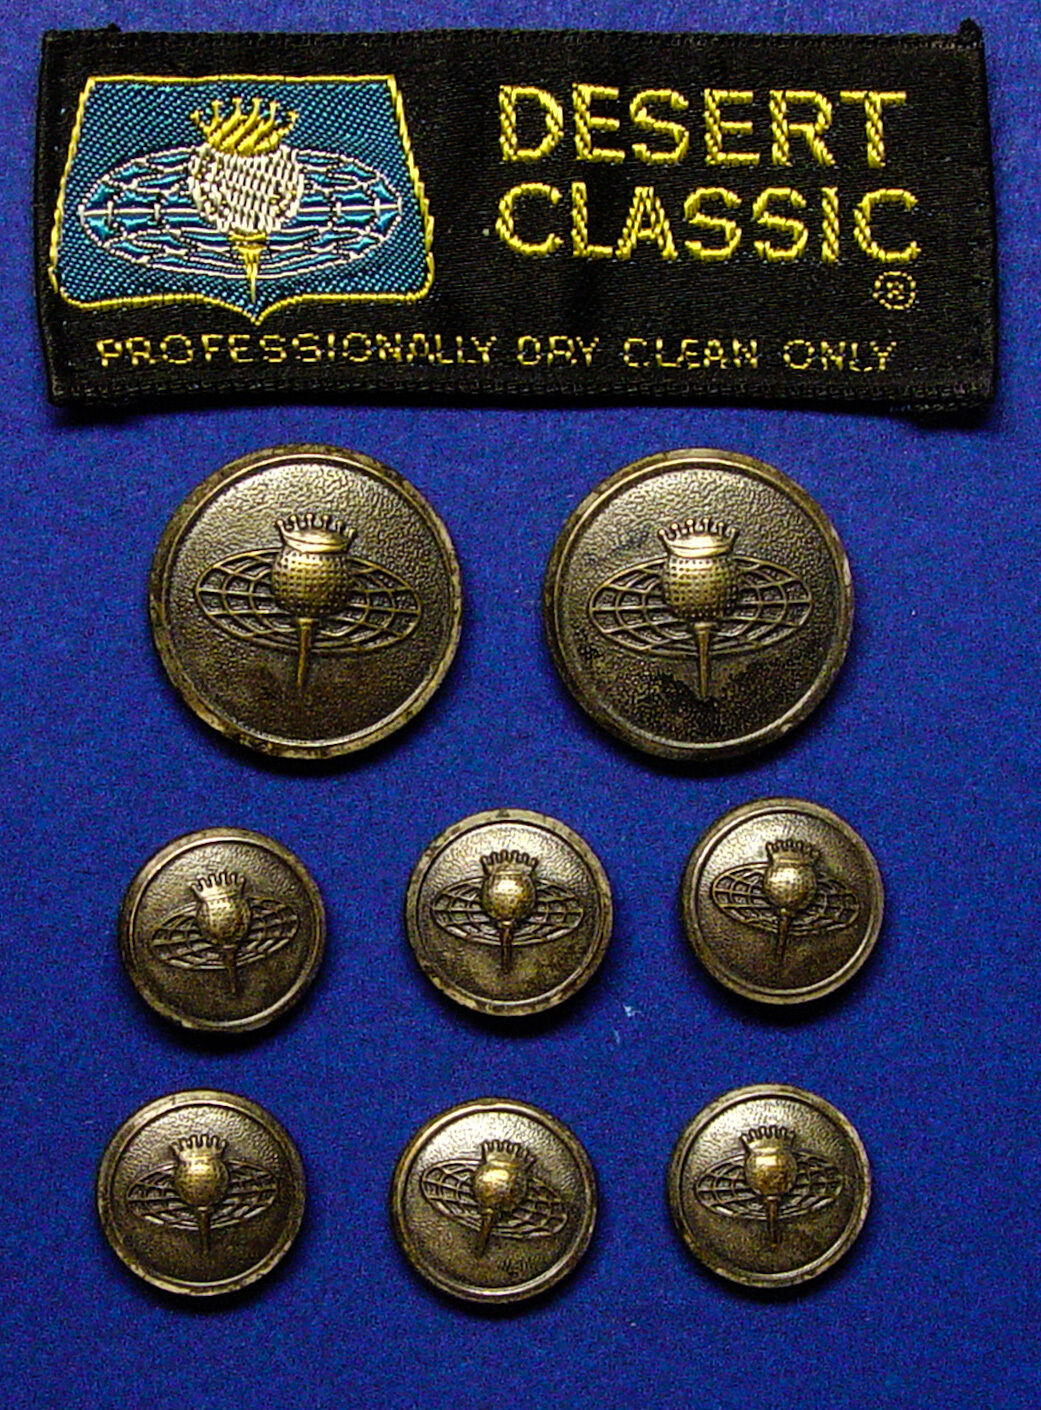 8 VTG DESERT CLASSIC JACKET BLAZER REPLACEMENT BUTTONS, AGED ANTIQUED CONDITION